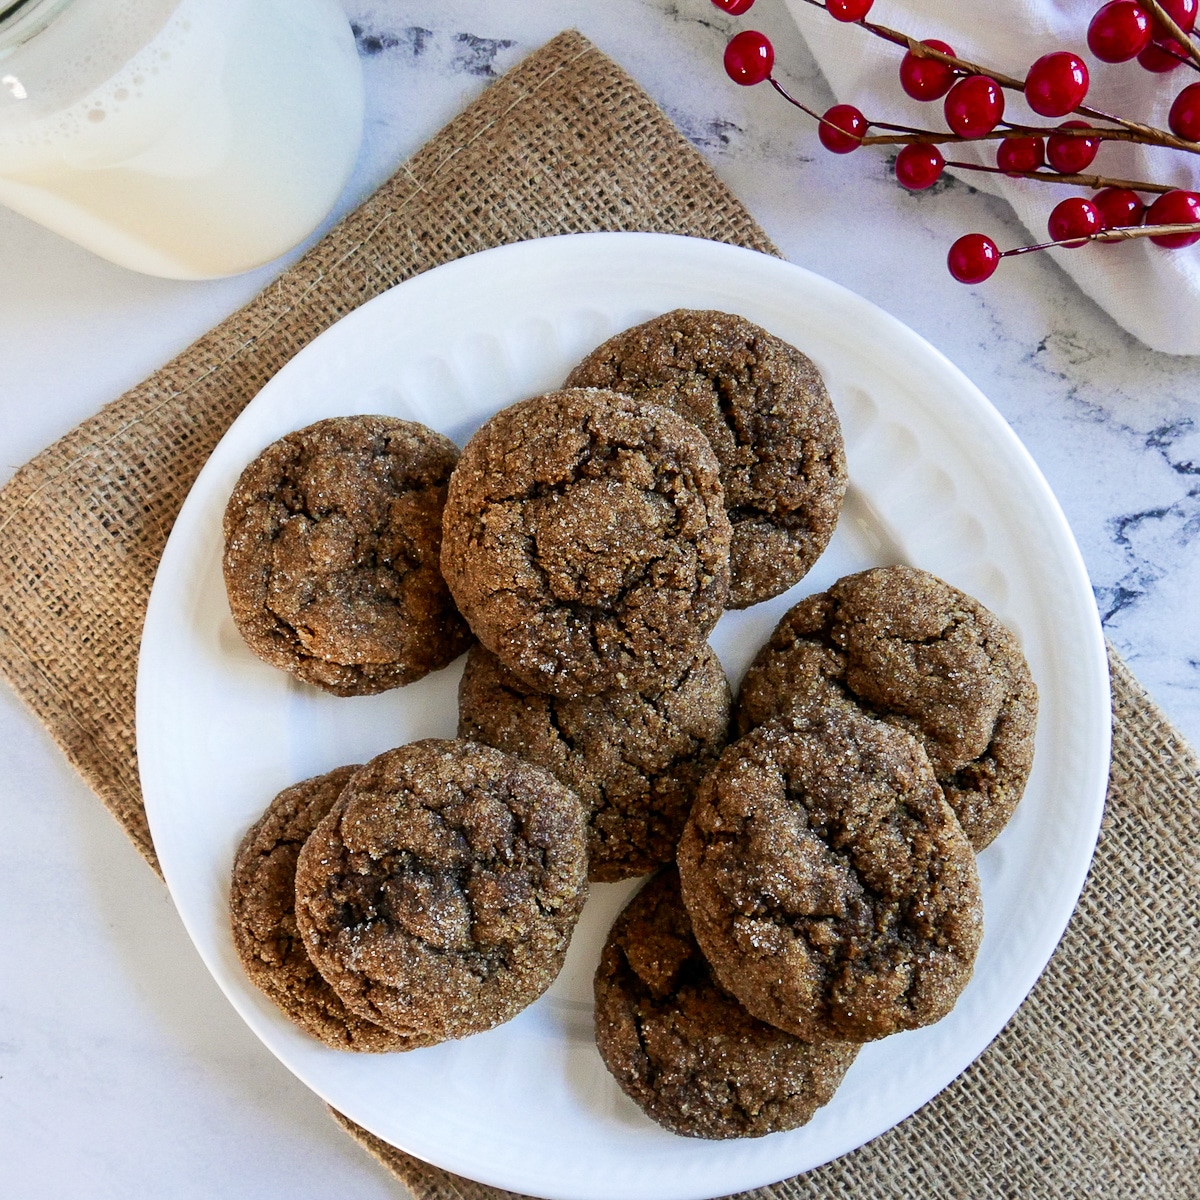 ginger snap cookies on a white plate with glass of milk and holly berries.